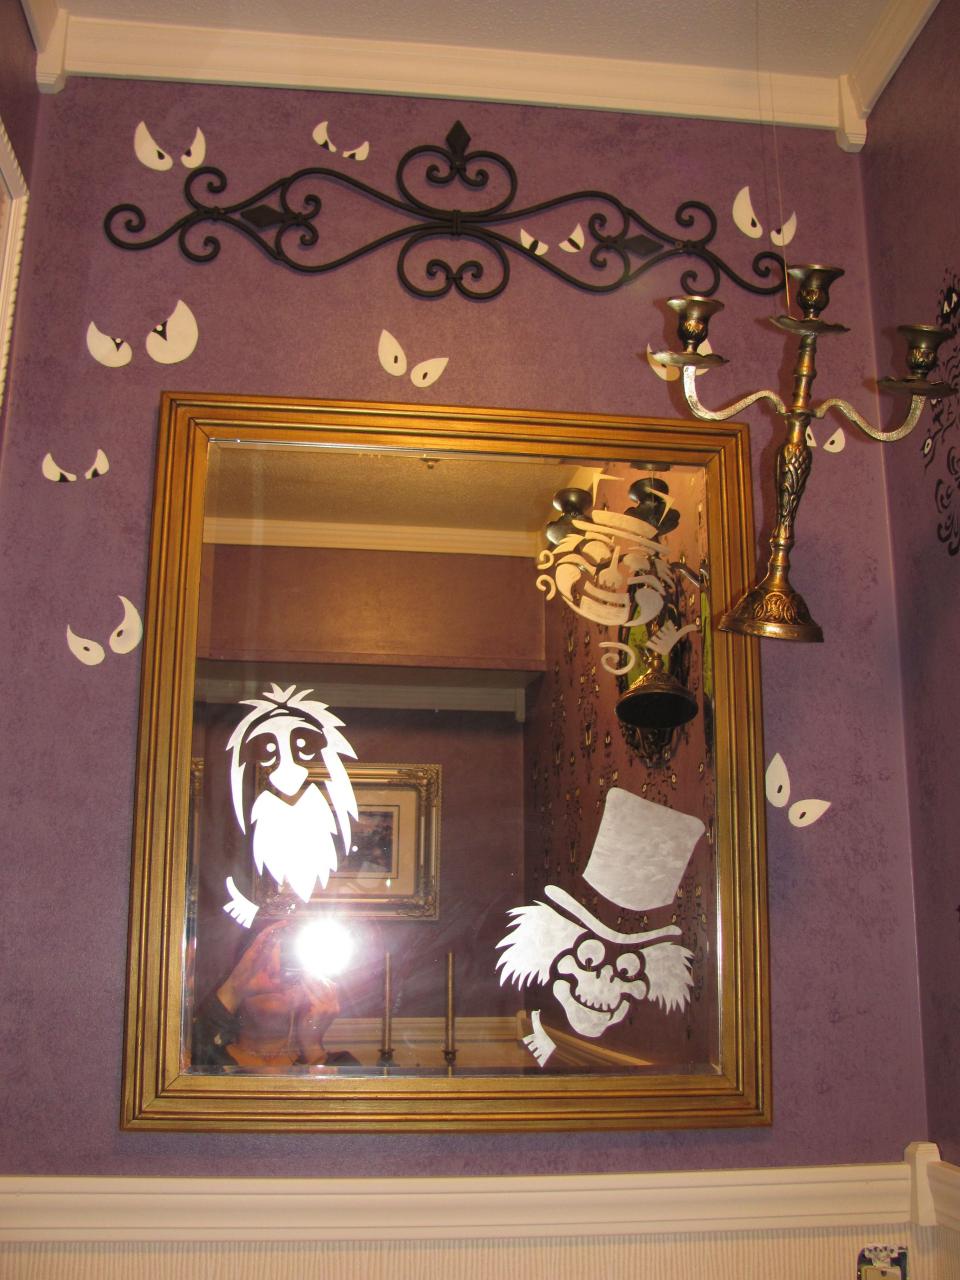 My Haunted Mansion Bathroom. I frosted ghosts onto the mirror, they're